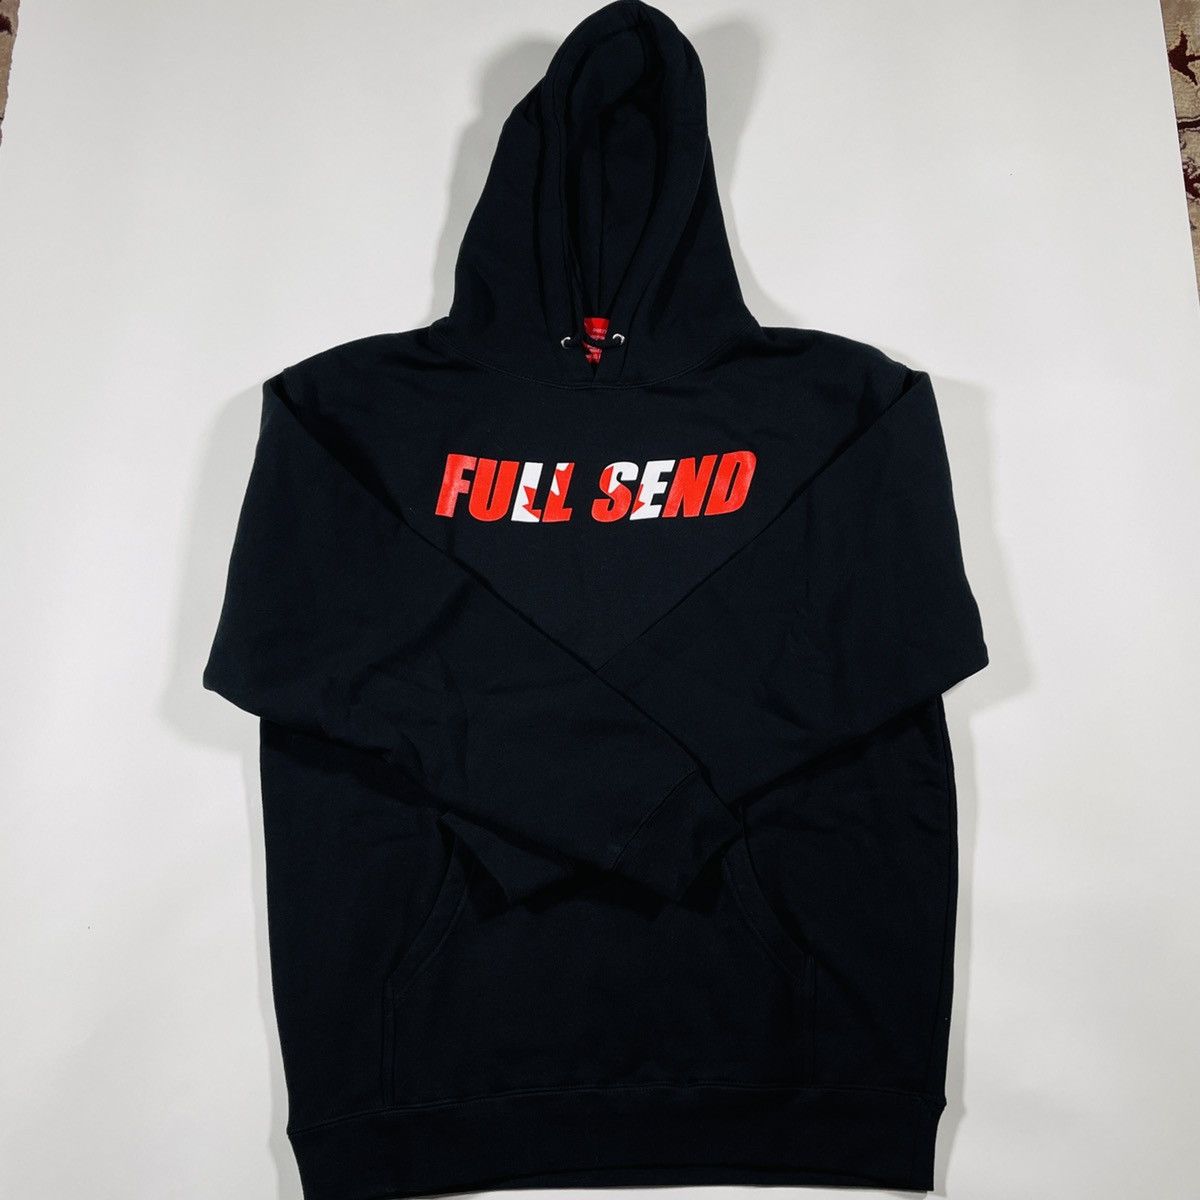 Full Send by Nelk Boys *NEW* Black Full Send Canada Day Hoodie LIMITED Size US M / EU 48-50 / 2 - 1 Preview